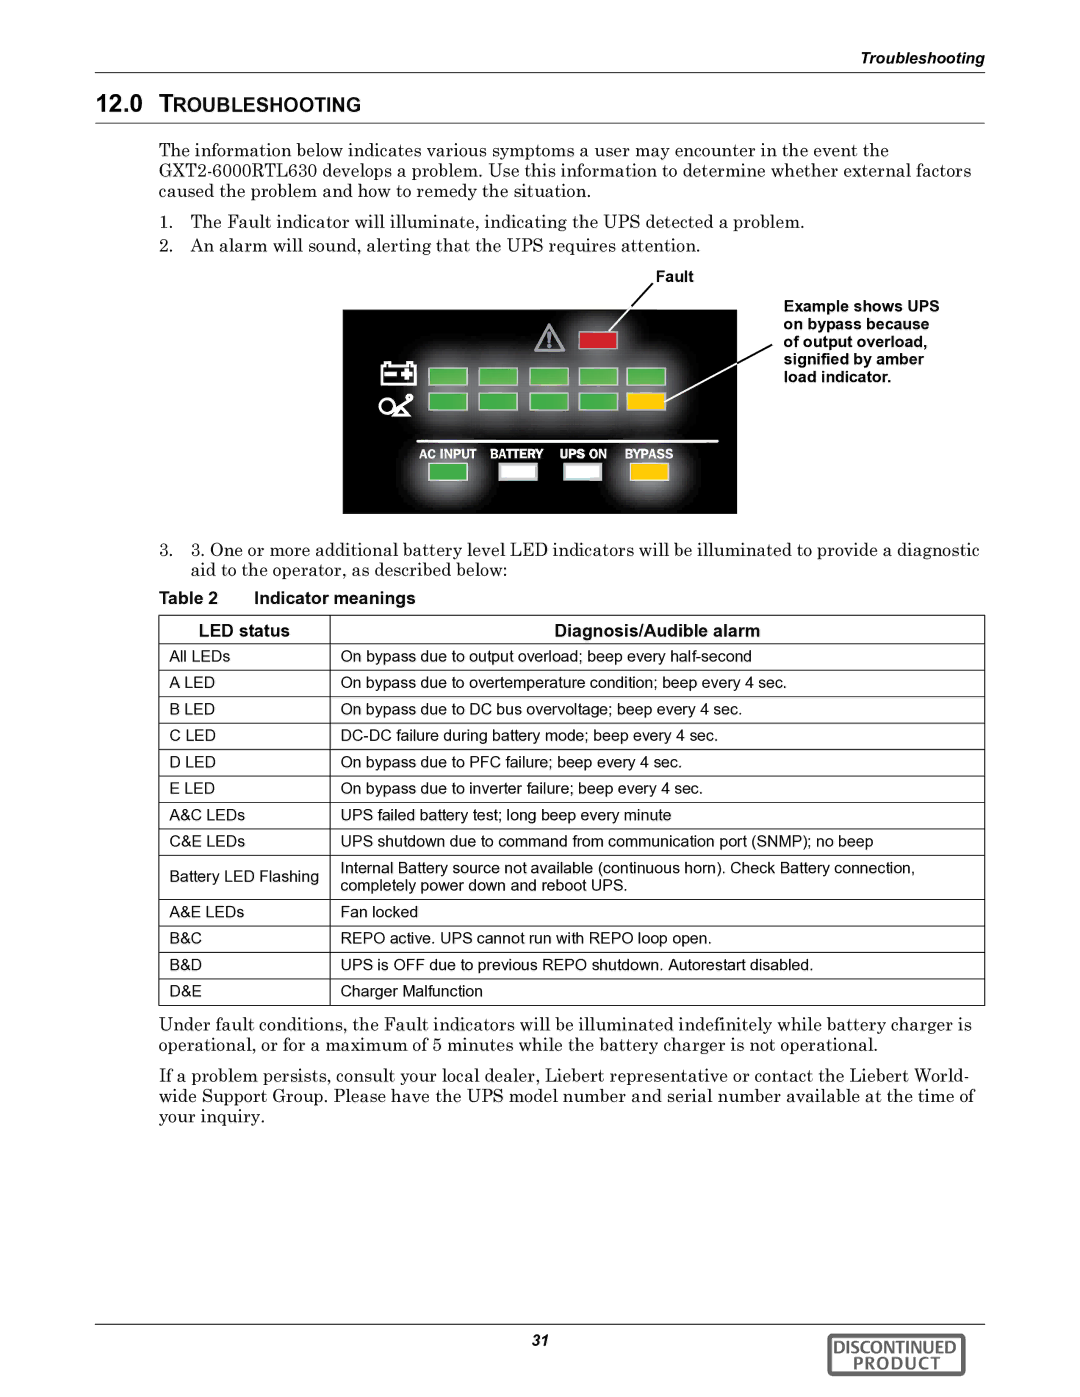 Emerson GXT2-6000RTL630 user manual Troubleshooting, Indicator meanings, LED status Diagnosis/Audible alarm 